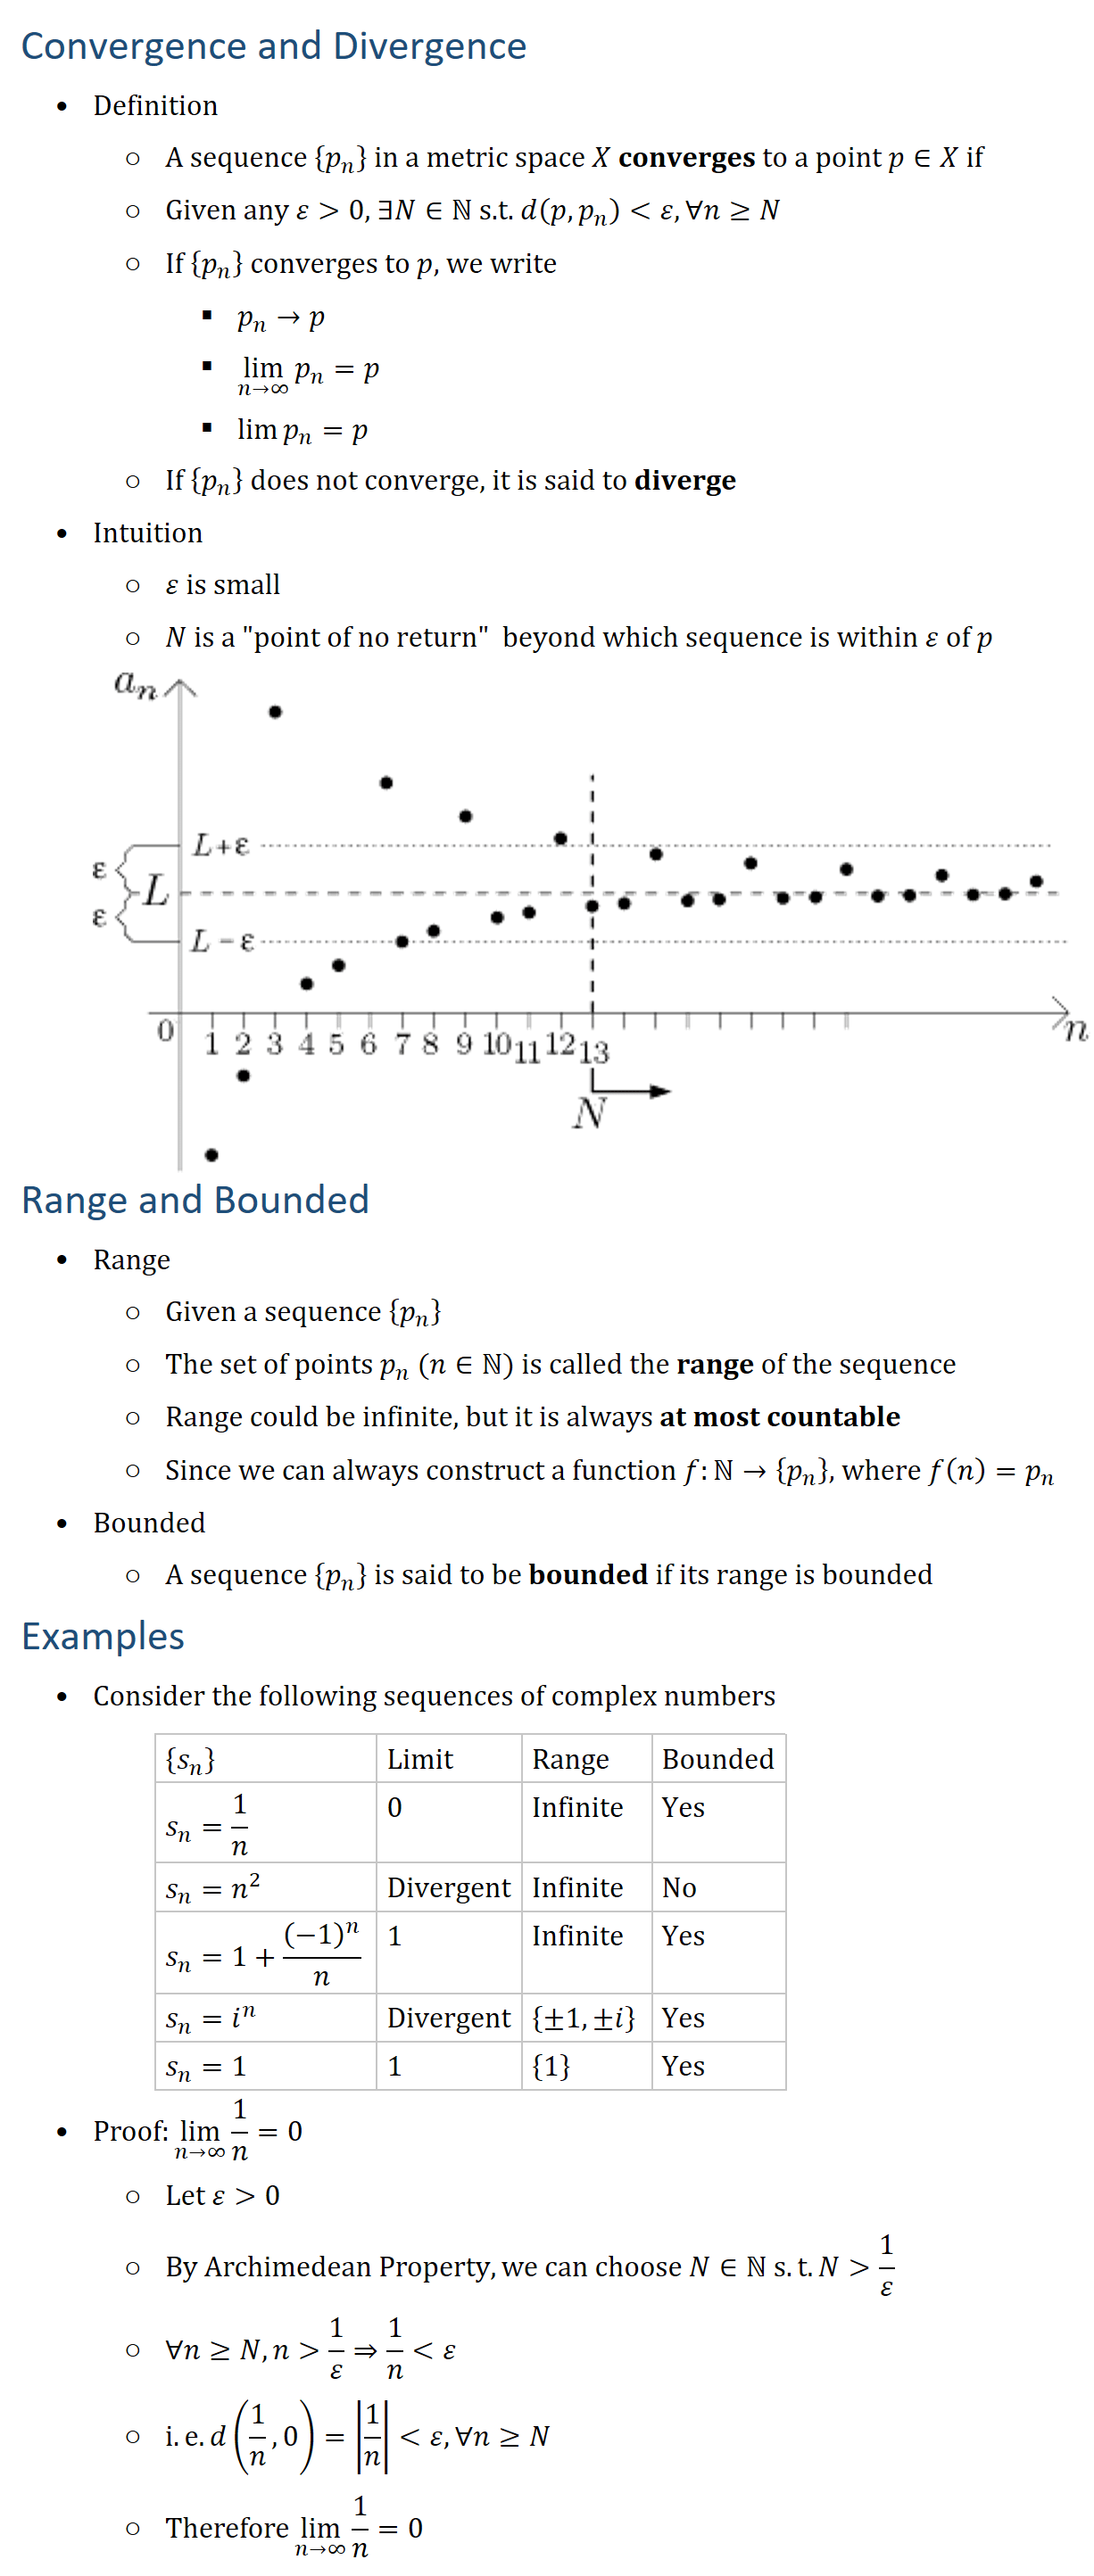 Convergence and Divergence • Definition ○ A sequence {p_n } in a metric space X converges to a point p∈X if ○ Given any ε 0, ∃N∈N s.t. d(p,p_n ) ε, ∀n≥N ○ If {p_n } converges to p, we write § p_n→p § lim_(n→∞)⁡〖p_n 〗=p § lim⁡〖p_n 〗=p ○ If {p_n } does not converge, it is said to diverge • Intuition ○ ε is small ○ N is a "point of no return" beyond which sequence is within ε of p Range and Bounded • Range ○ Given a sequence {p_n } ○ The set of points p_n (n∈N) is called the range of the sequence ○ Range could be infinite, but it is always at most countable ○ Since we can always construct a function f:N→{p_n }, where f(n)=p_n • Bounded ○ A sequence {p_n } is said to be bounded if its range is bounded Examples • Consider the following sequences of complex numbers {s_n } Limit Range Bounded s_n=1/n 0 Infinite Yes s_n=n^2 Divergent Infinite No s_n=1+(−1)^n/n 1 Infinite Yes s_n=i^n Divergent {±1,±i} Yes s_n=1 1 {1} Yes • Proof:lim_(n→∞)⁡〖1/n〗=0 ○ Let ε 0 ○ By Archimedean Property, we can choose N∈N s.t. N 1/ε ○ ∀n≥N, n 1/ε⇒1/n ε ○ i.e. d(1/n,0)=|1/n| ε,∀n≥N ○ Therefore lim_(n→∞)⁡〖1/n〗=0